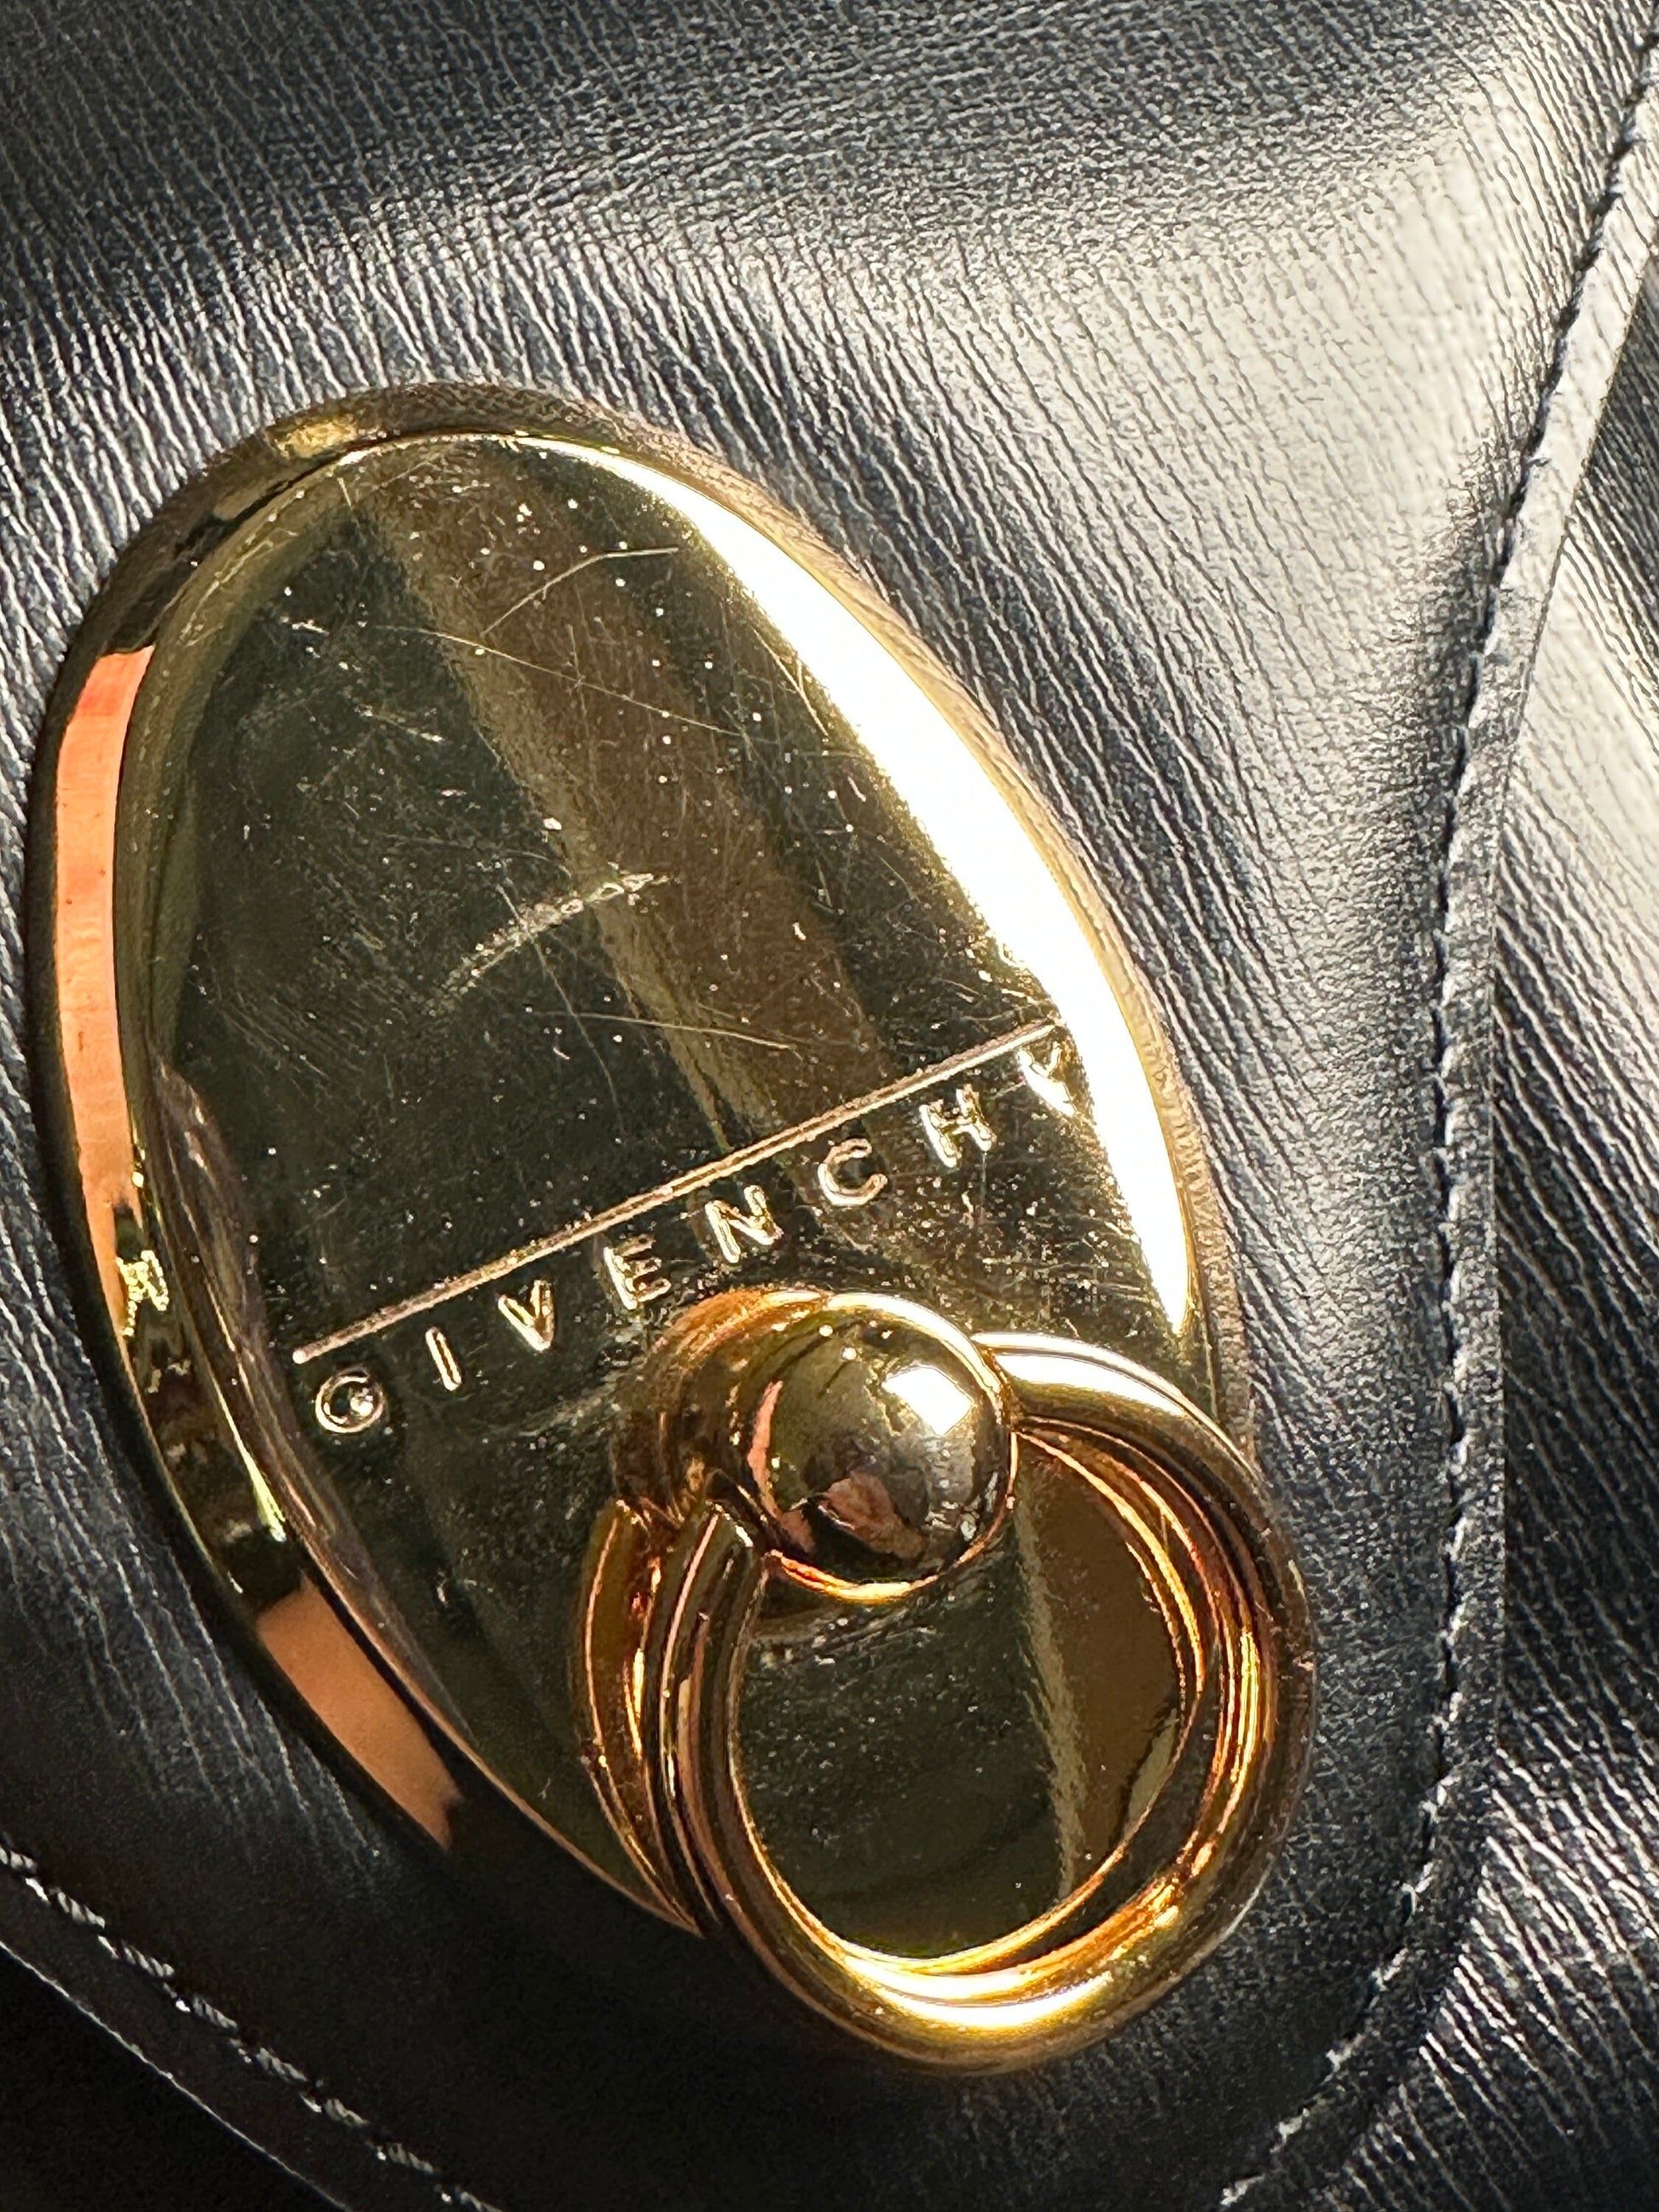 GIVENCHY VINTAGE 100% Authentic GenuineTop Handle Bag, Black, Late 1990's, Great Condition